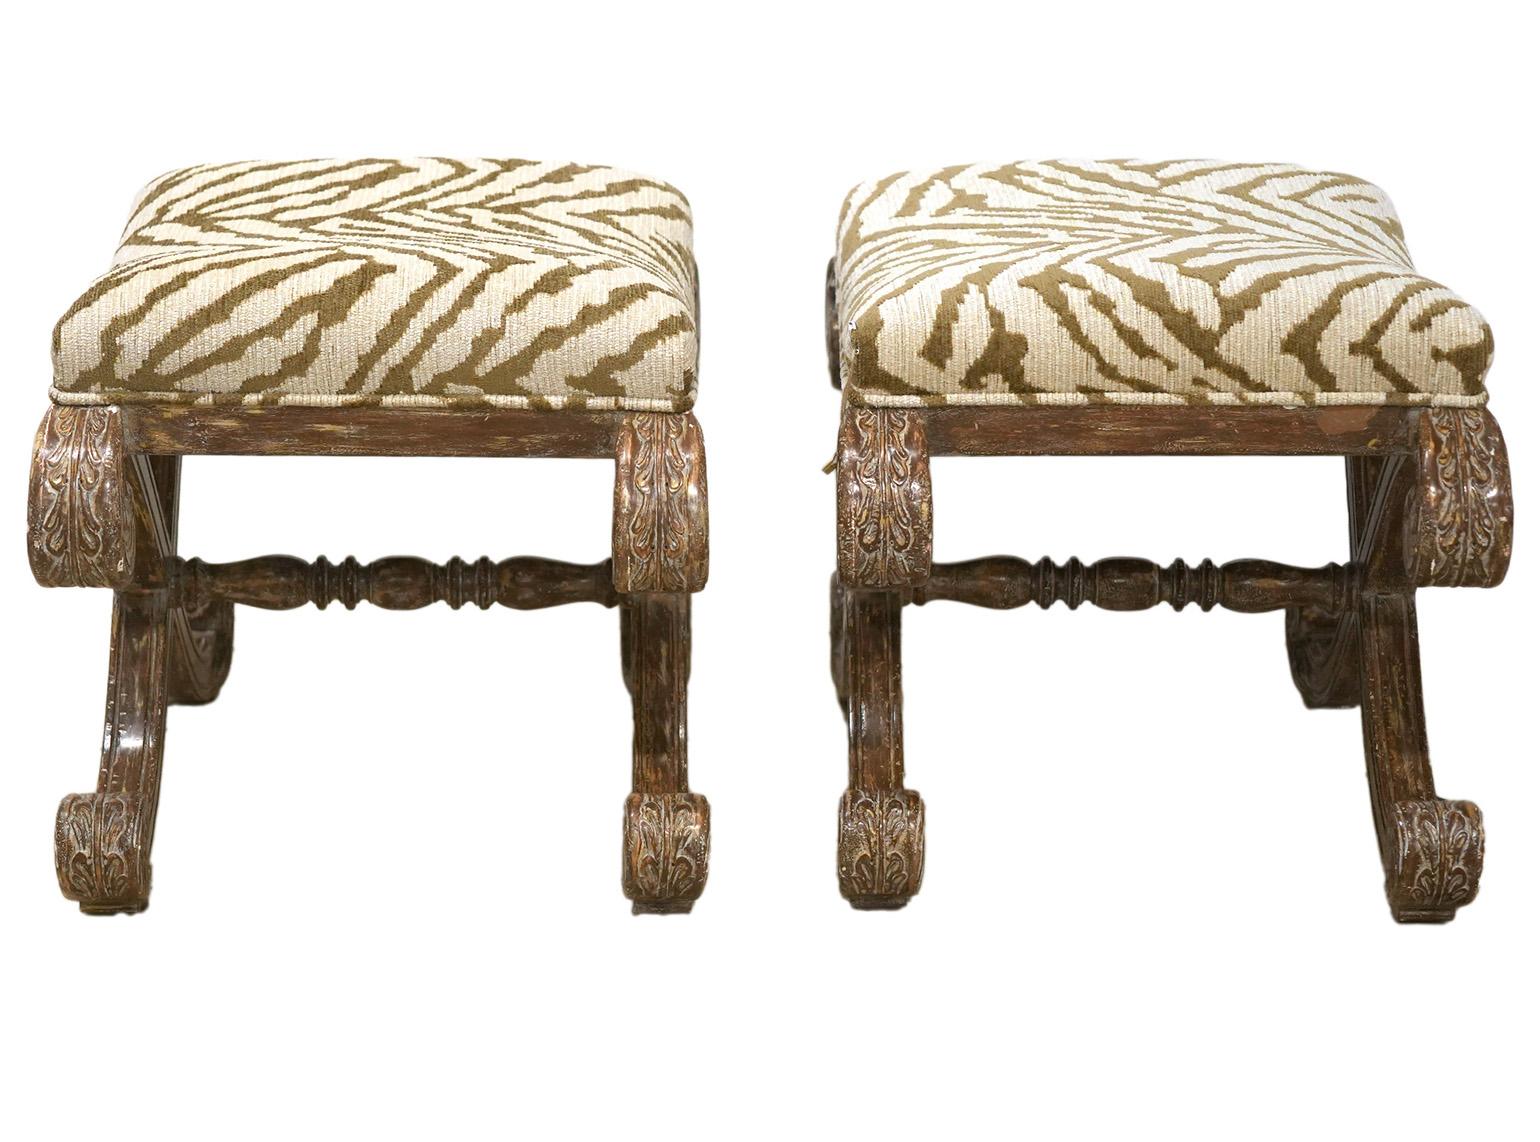 Pair of Vintage French 'X' Stretchered Carved and Painted Benches In Good Condition For Sale In Ft. Lauderdale, FL